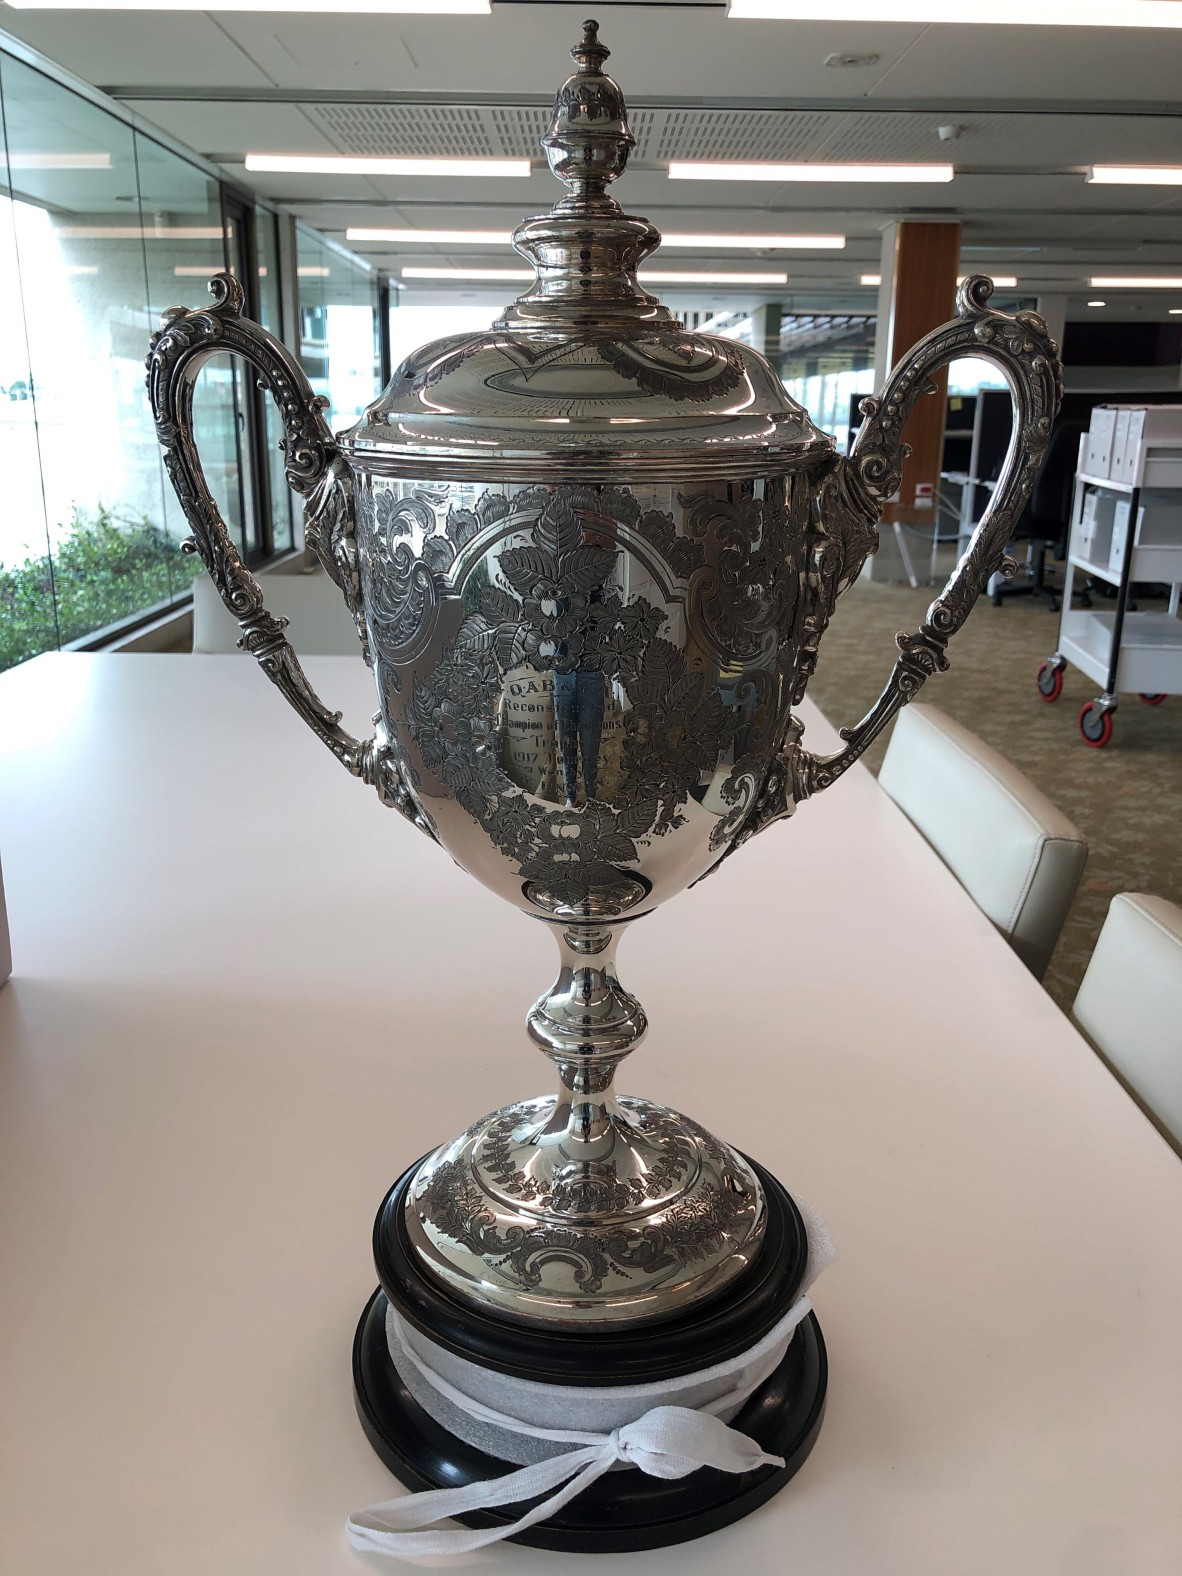 The sterling silver cup trophy presented to William Billy Baden Unwin for winning theQueensland Amateur Boxing title in 1917